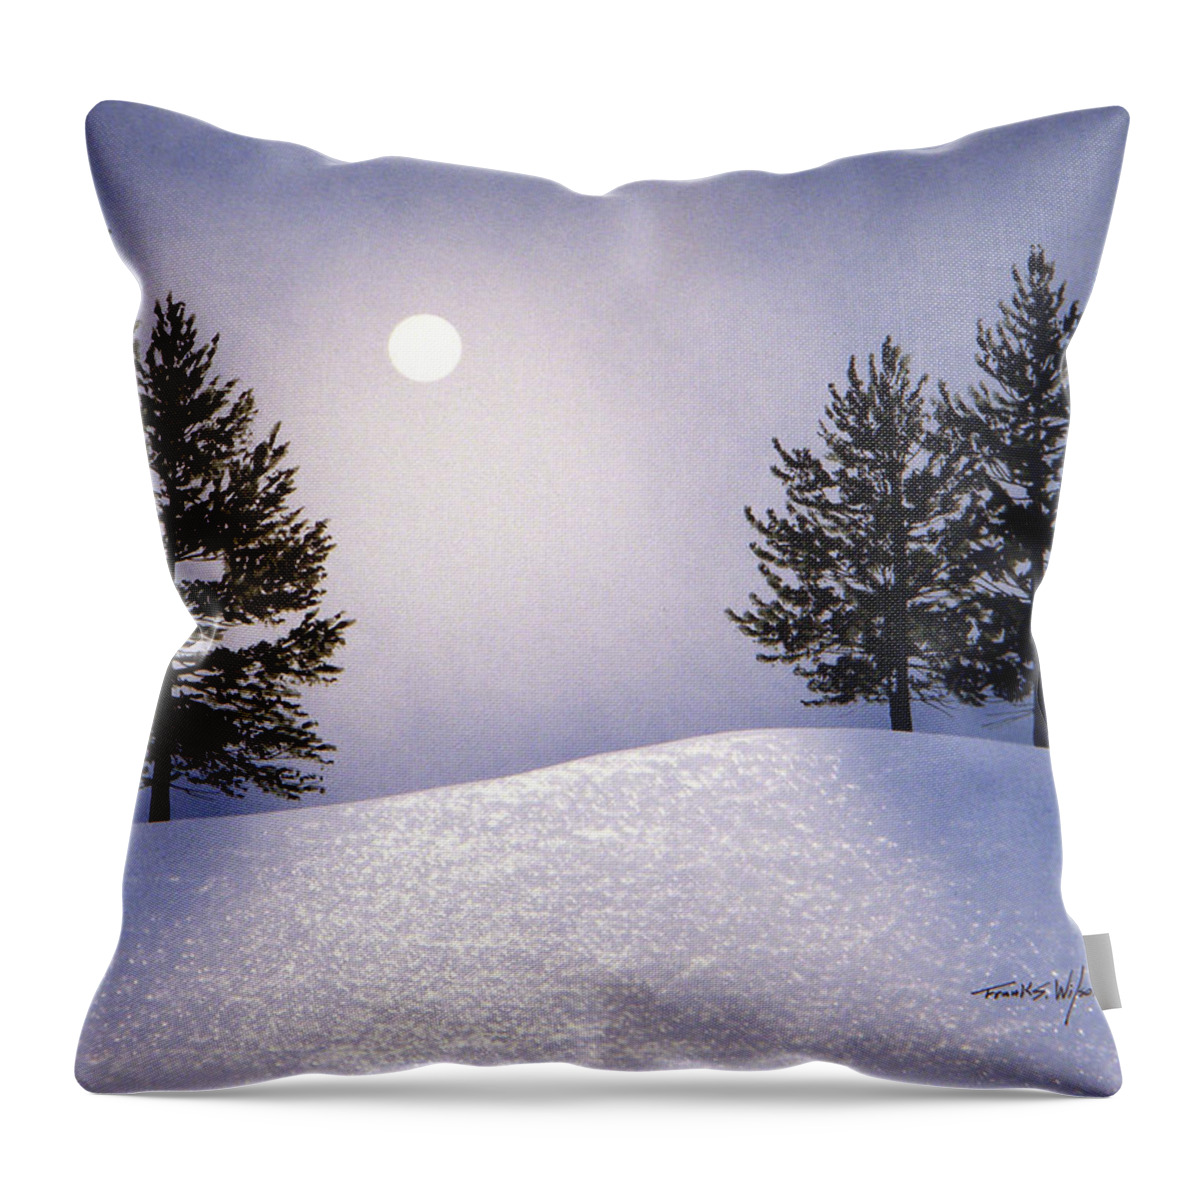 Mountains Throw Pillow featuring the painting Glorious Night by Frank Wilson